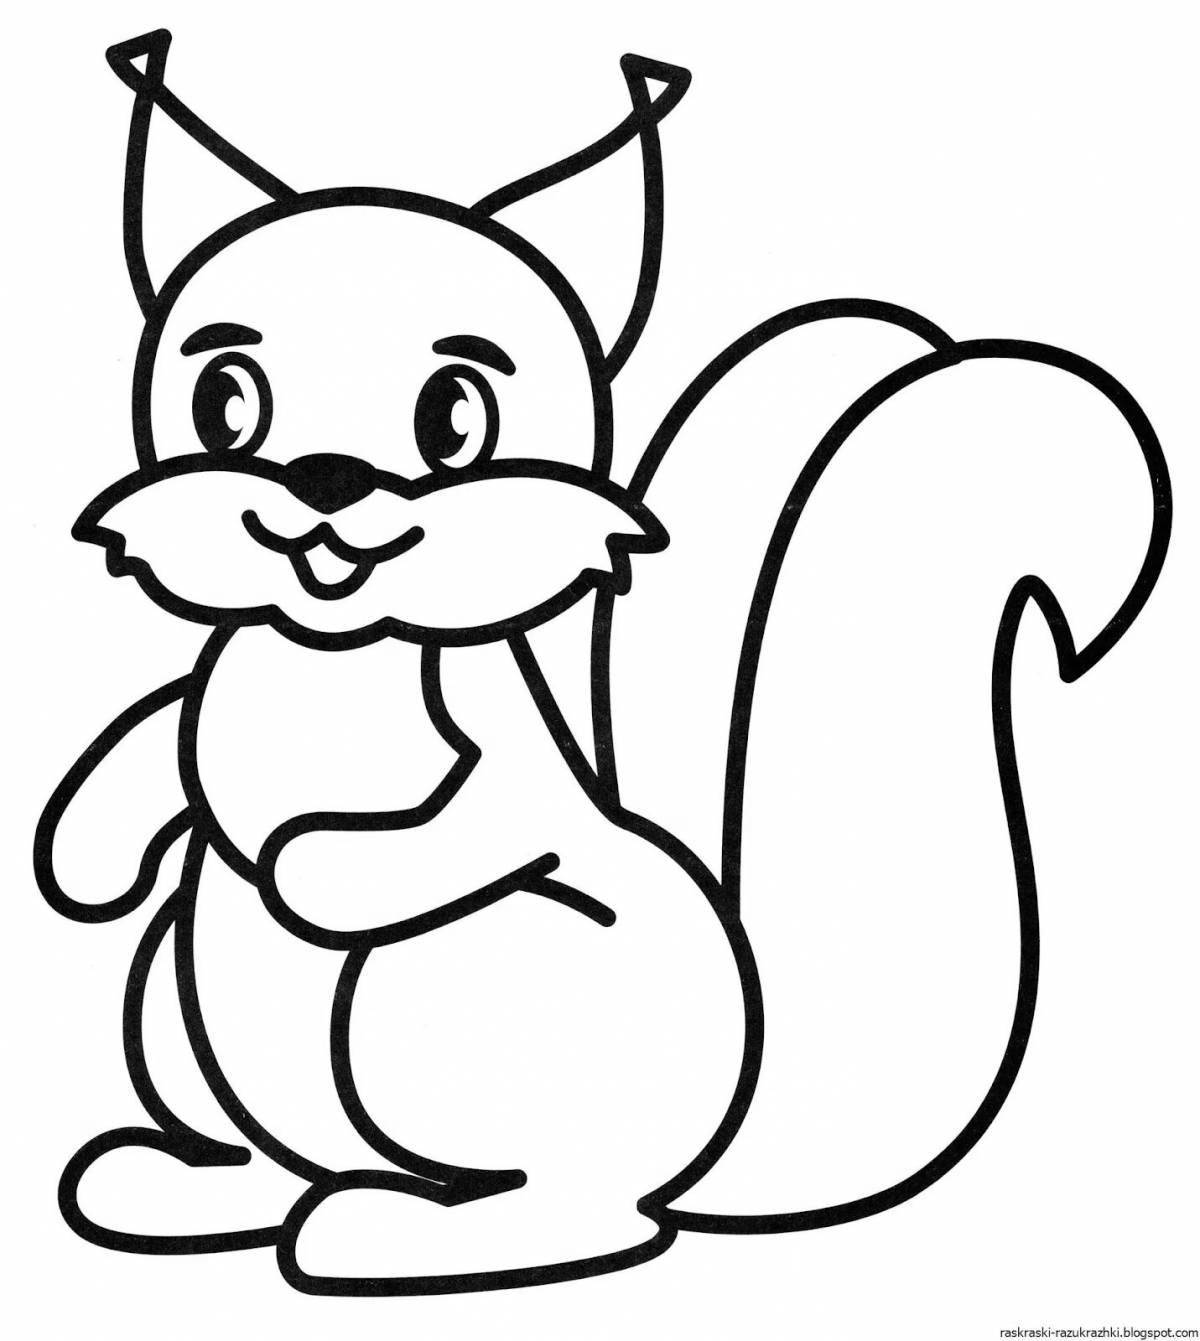 Playful squirrel coloring for kids